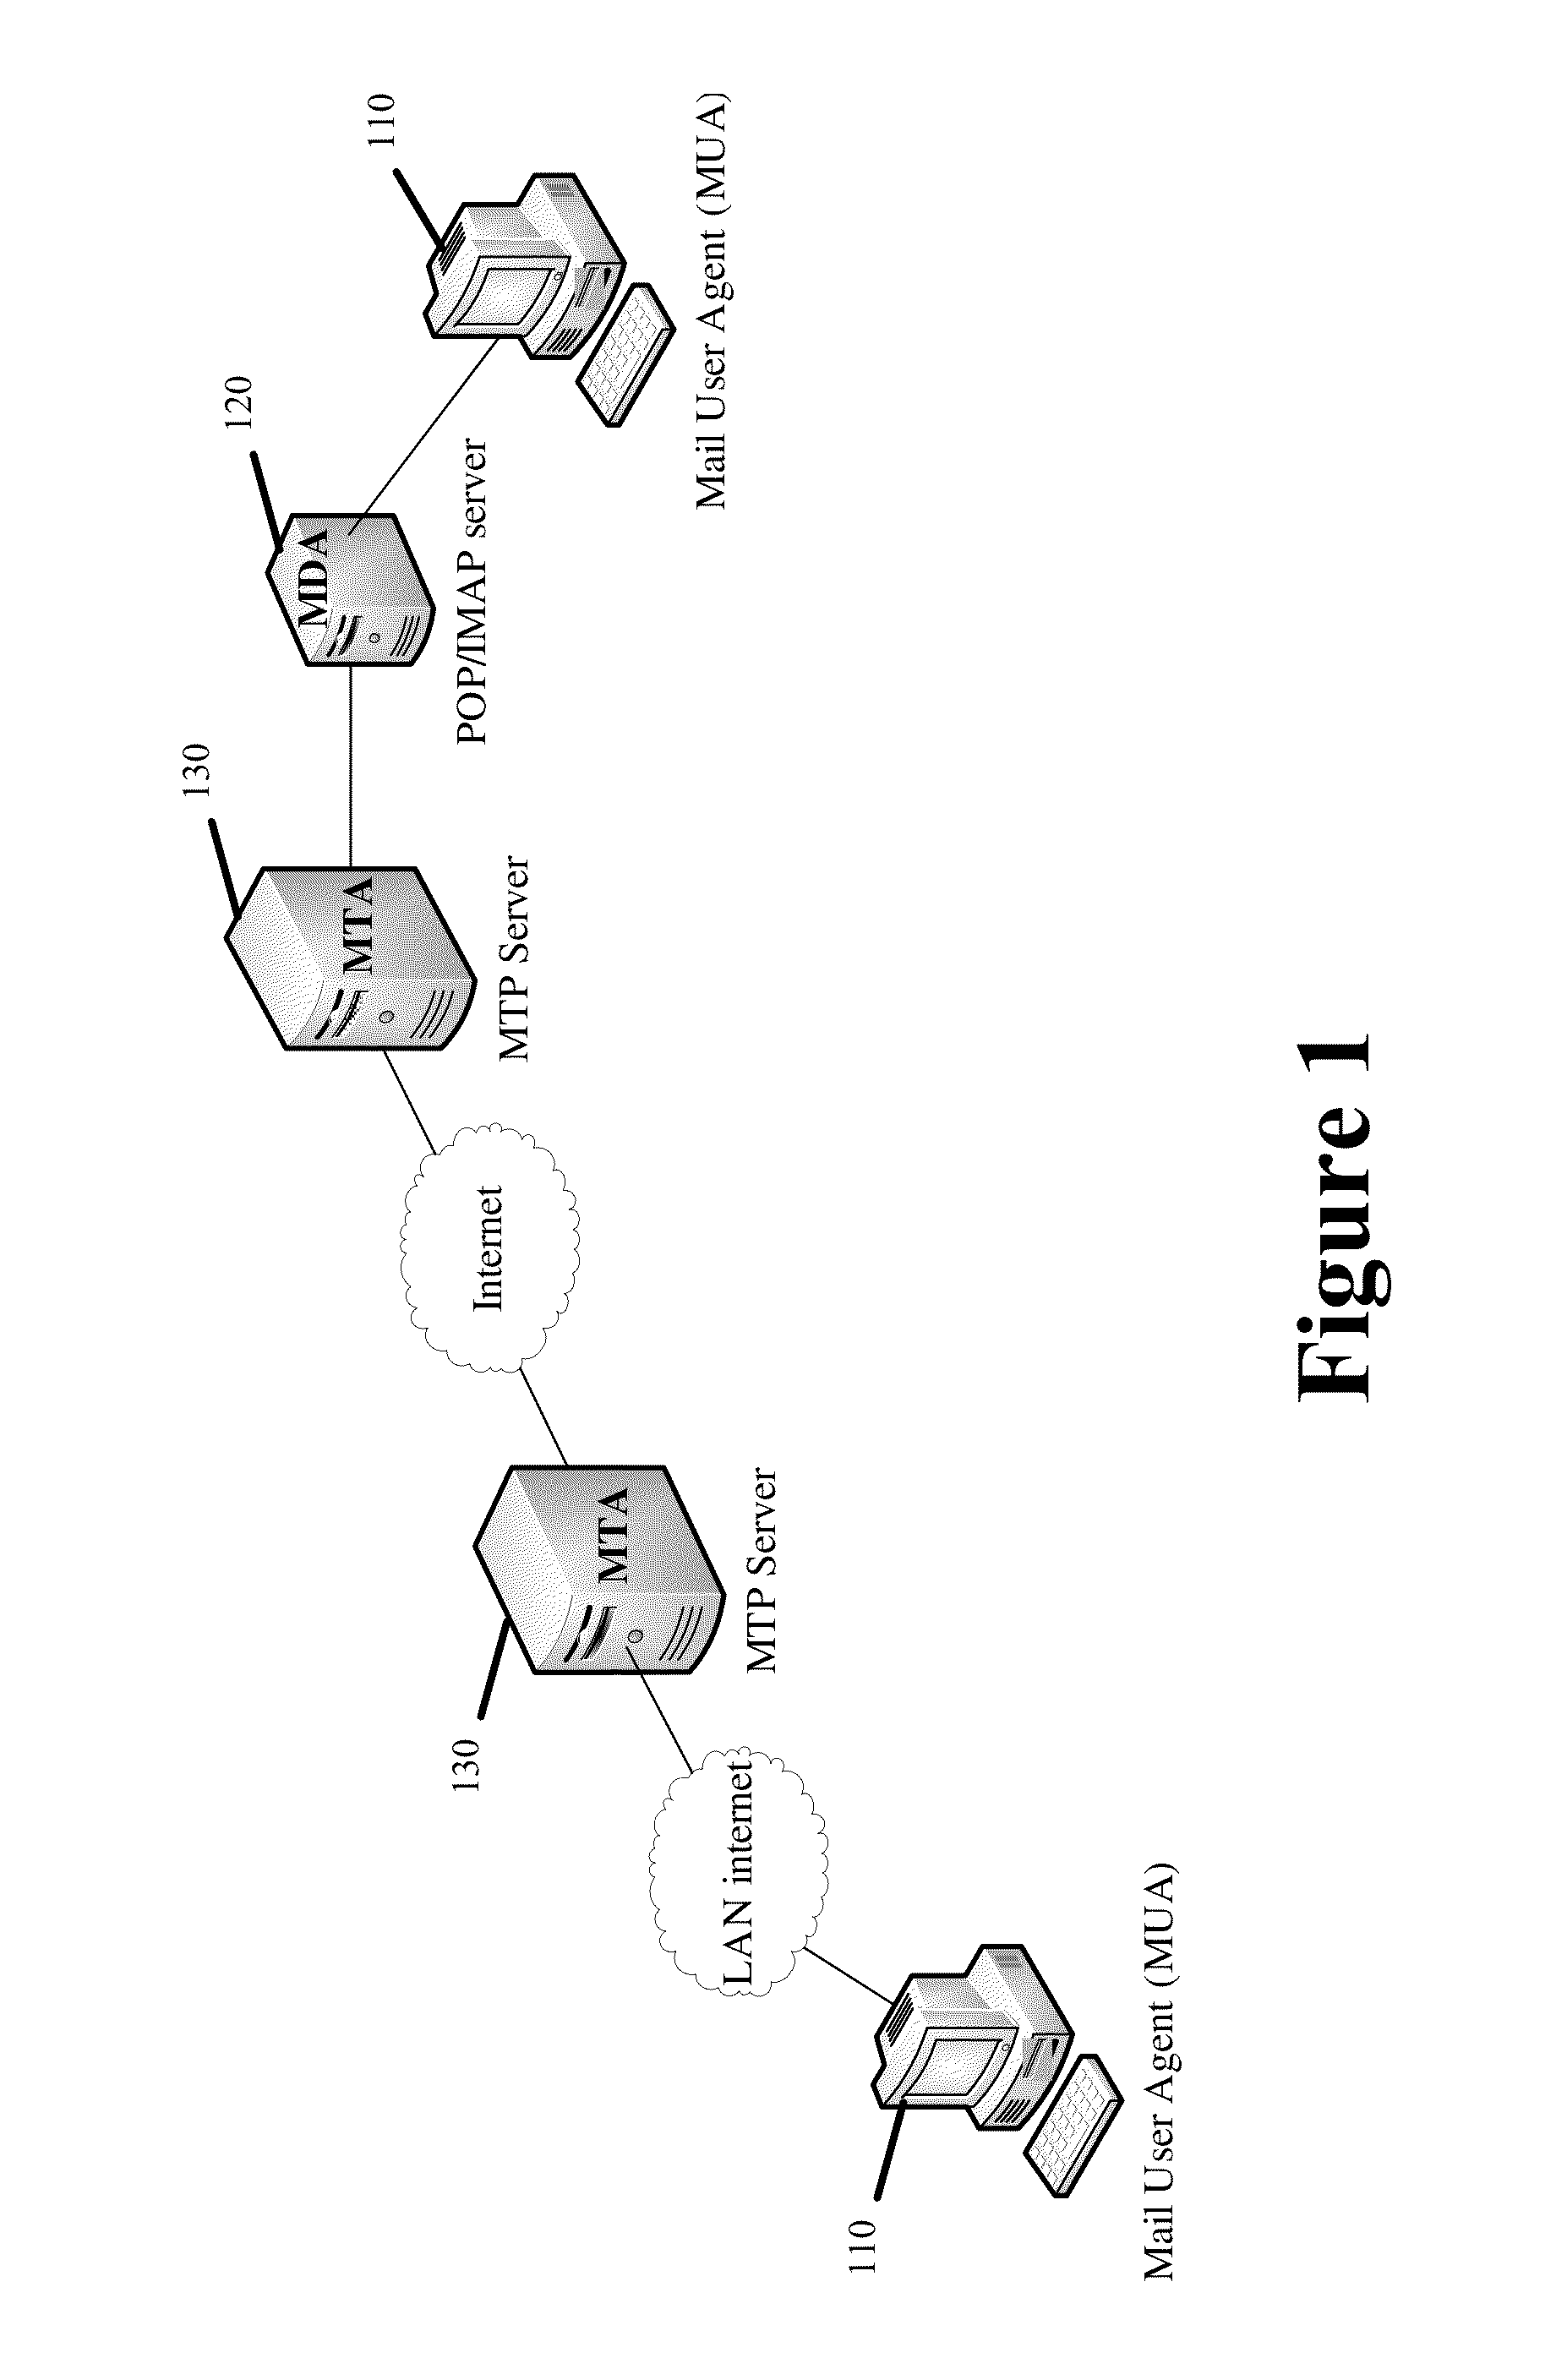 Systems and Methods Providing Integrated Communication and Task Management